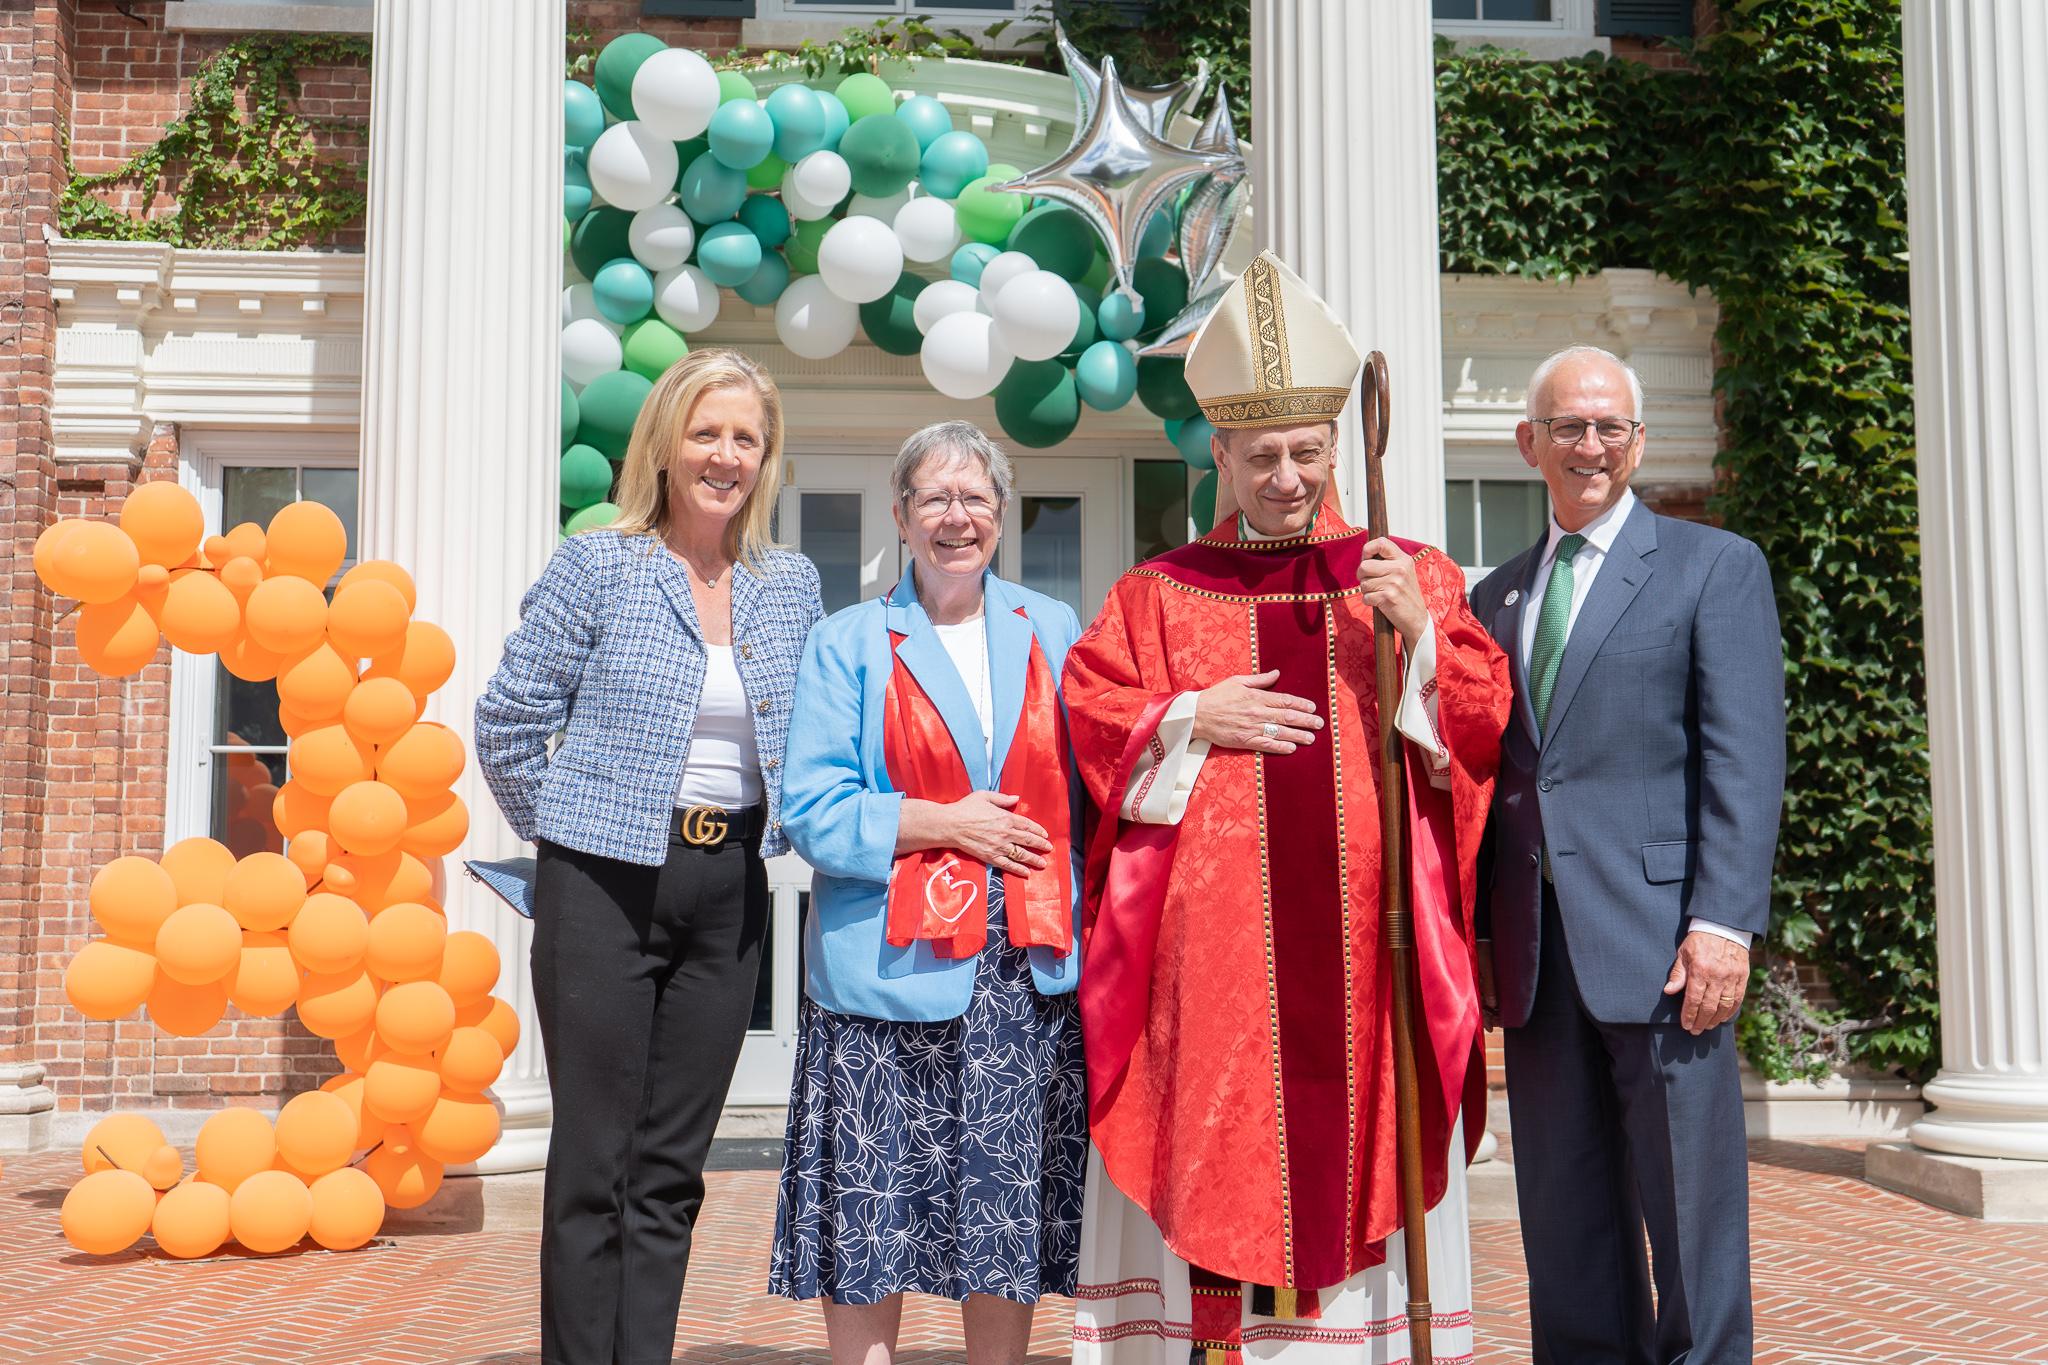 (right to left) Michael F. Baber with Bishop Frank J. Caggiano, Bishop of the Diocese of Bridgeport, Suzanne Cooke, RSCJ, and  Kathleen O'Connor, Chair of the Greenwich Board of Trustees . (Photo courtesy of Sacred Heart Greenwich)